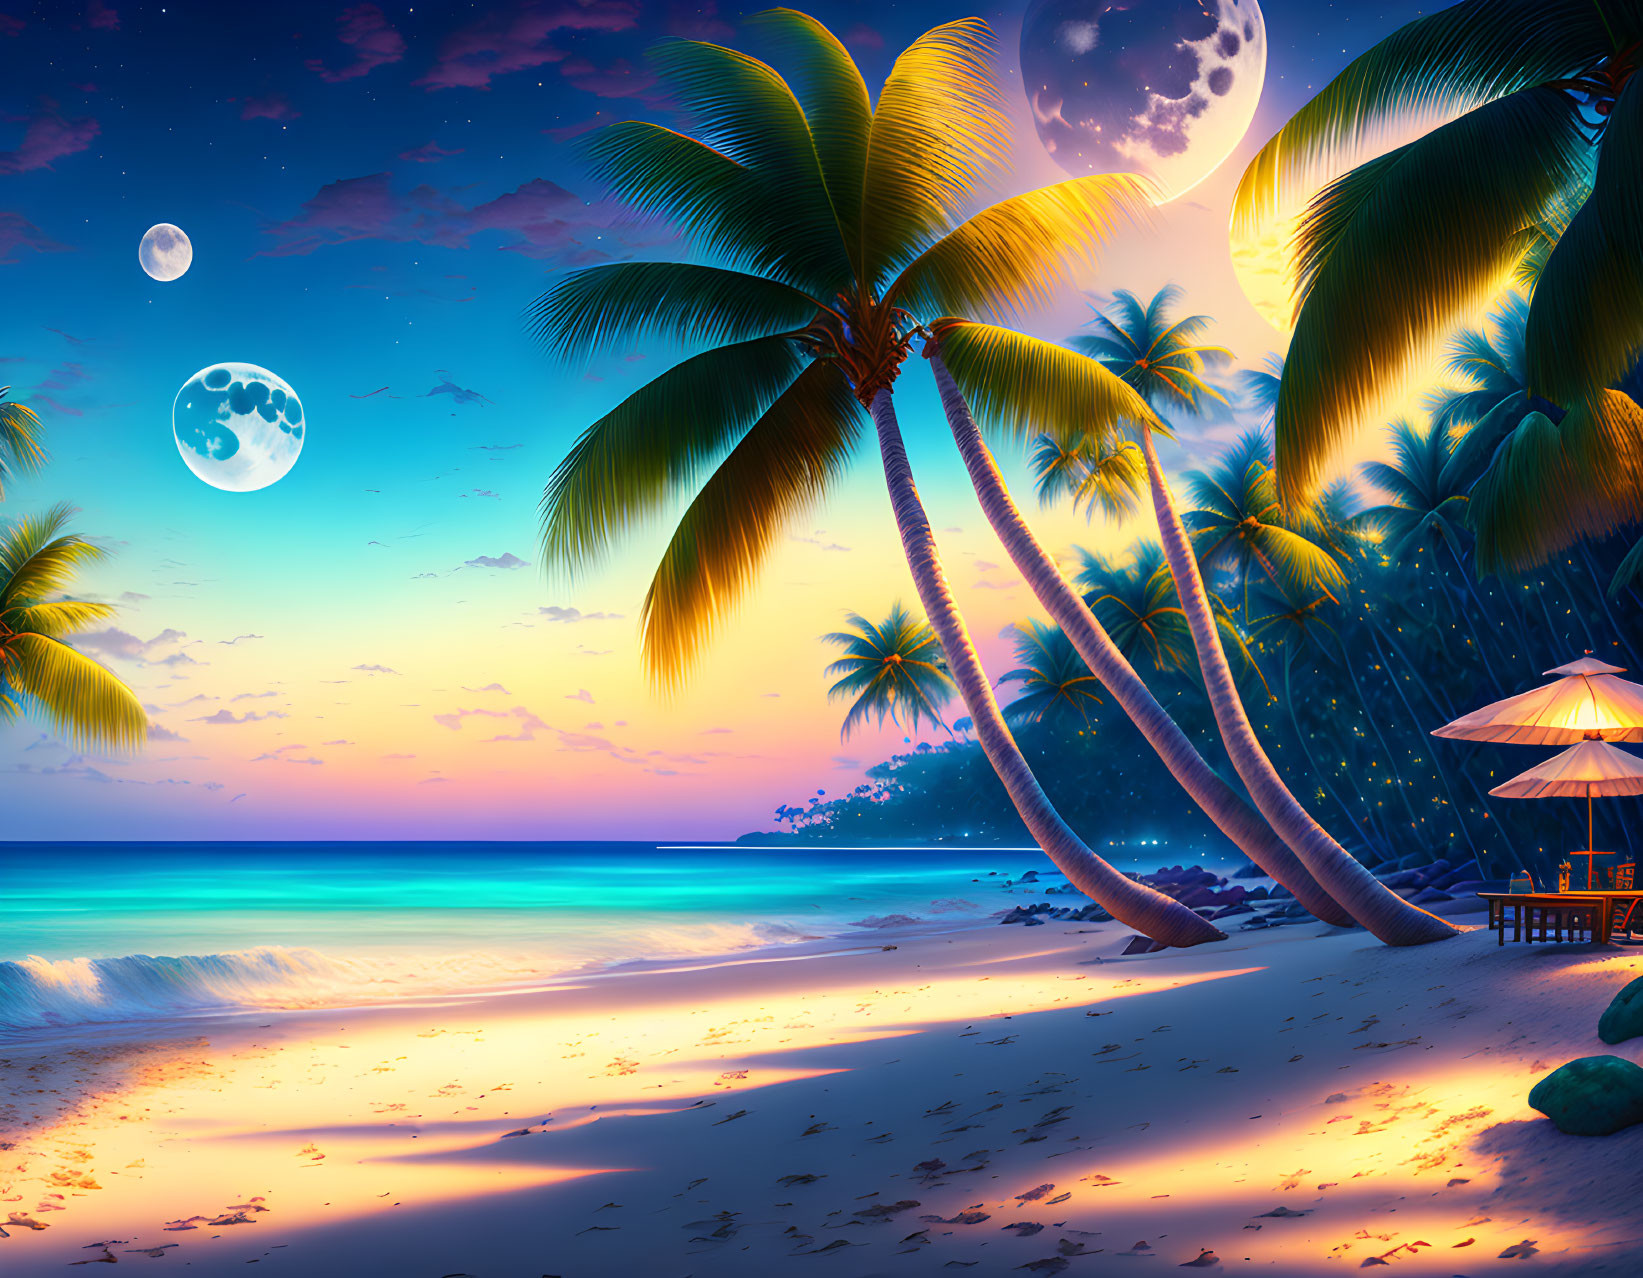 Colorful Dusk Beachscape with Palm Trees, Hut, and Moons